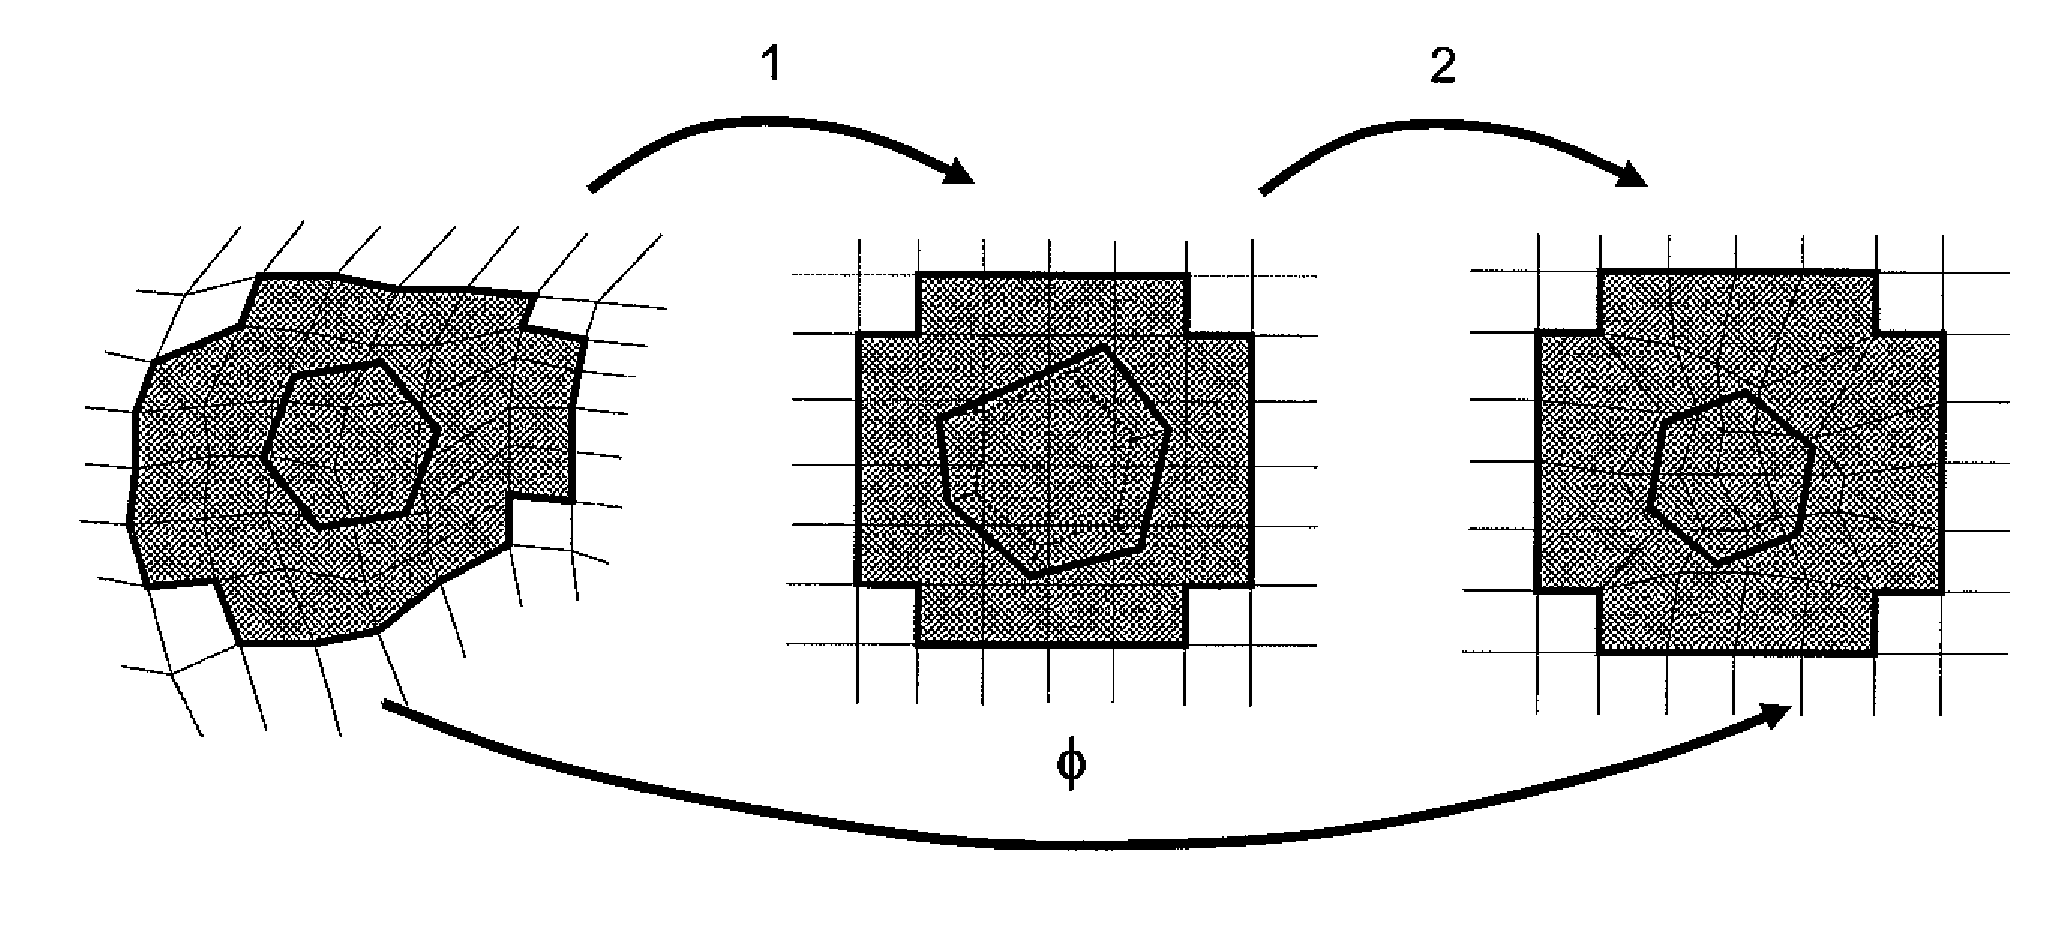 Method for constructing a hybrid grid from a CPG type grid